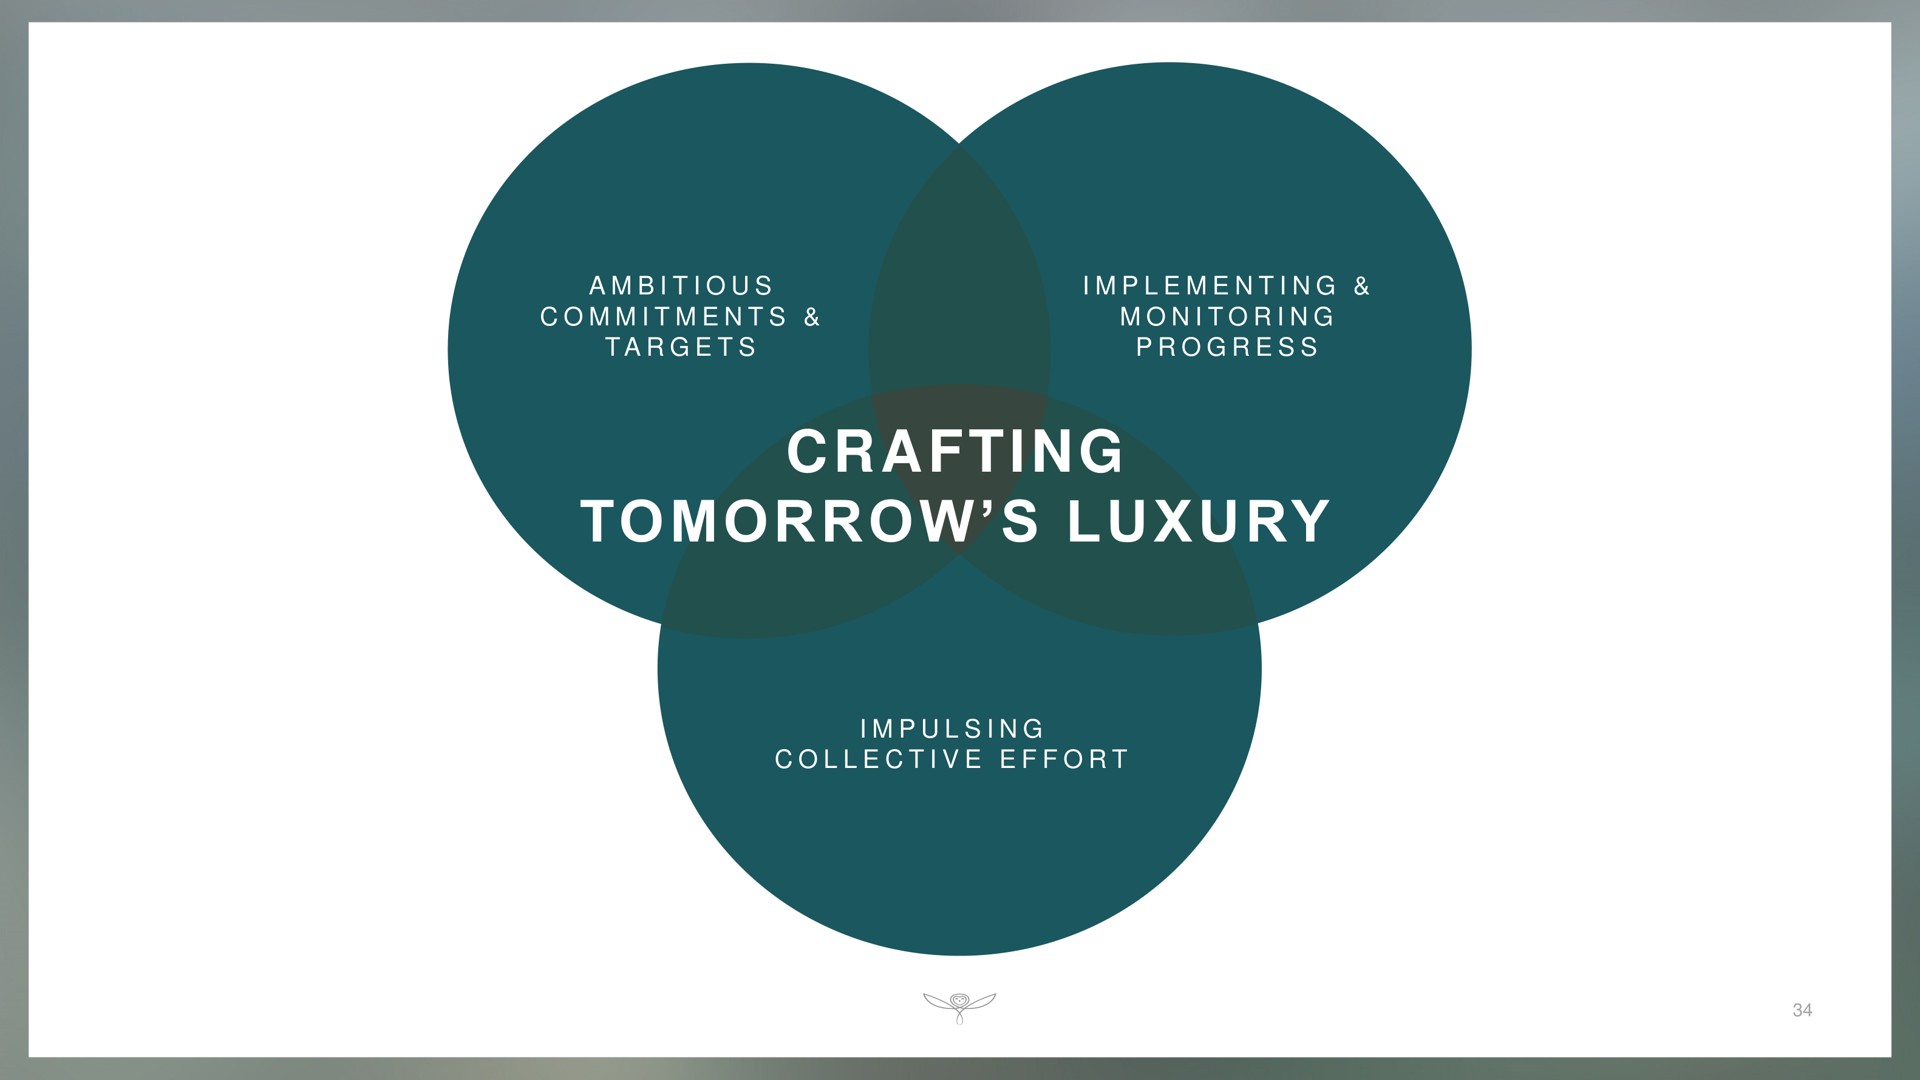 a i i i a i i i i crafting tomorrow luxury i i i ambitious commitments targets implementing monitoring progress collective effort | Kering